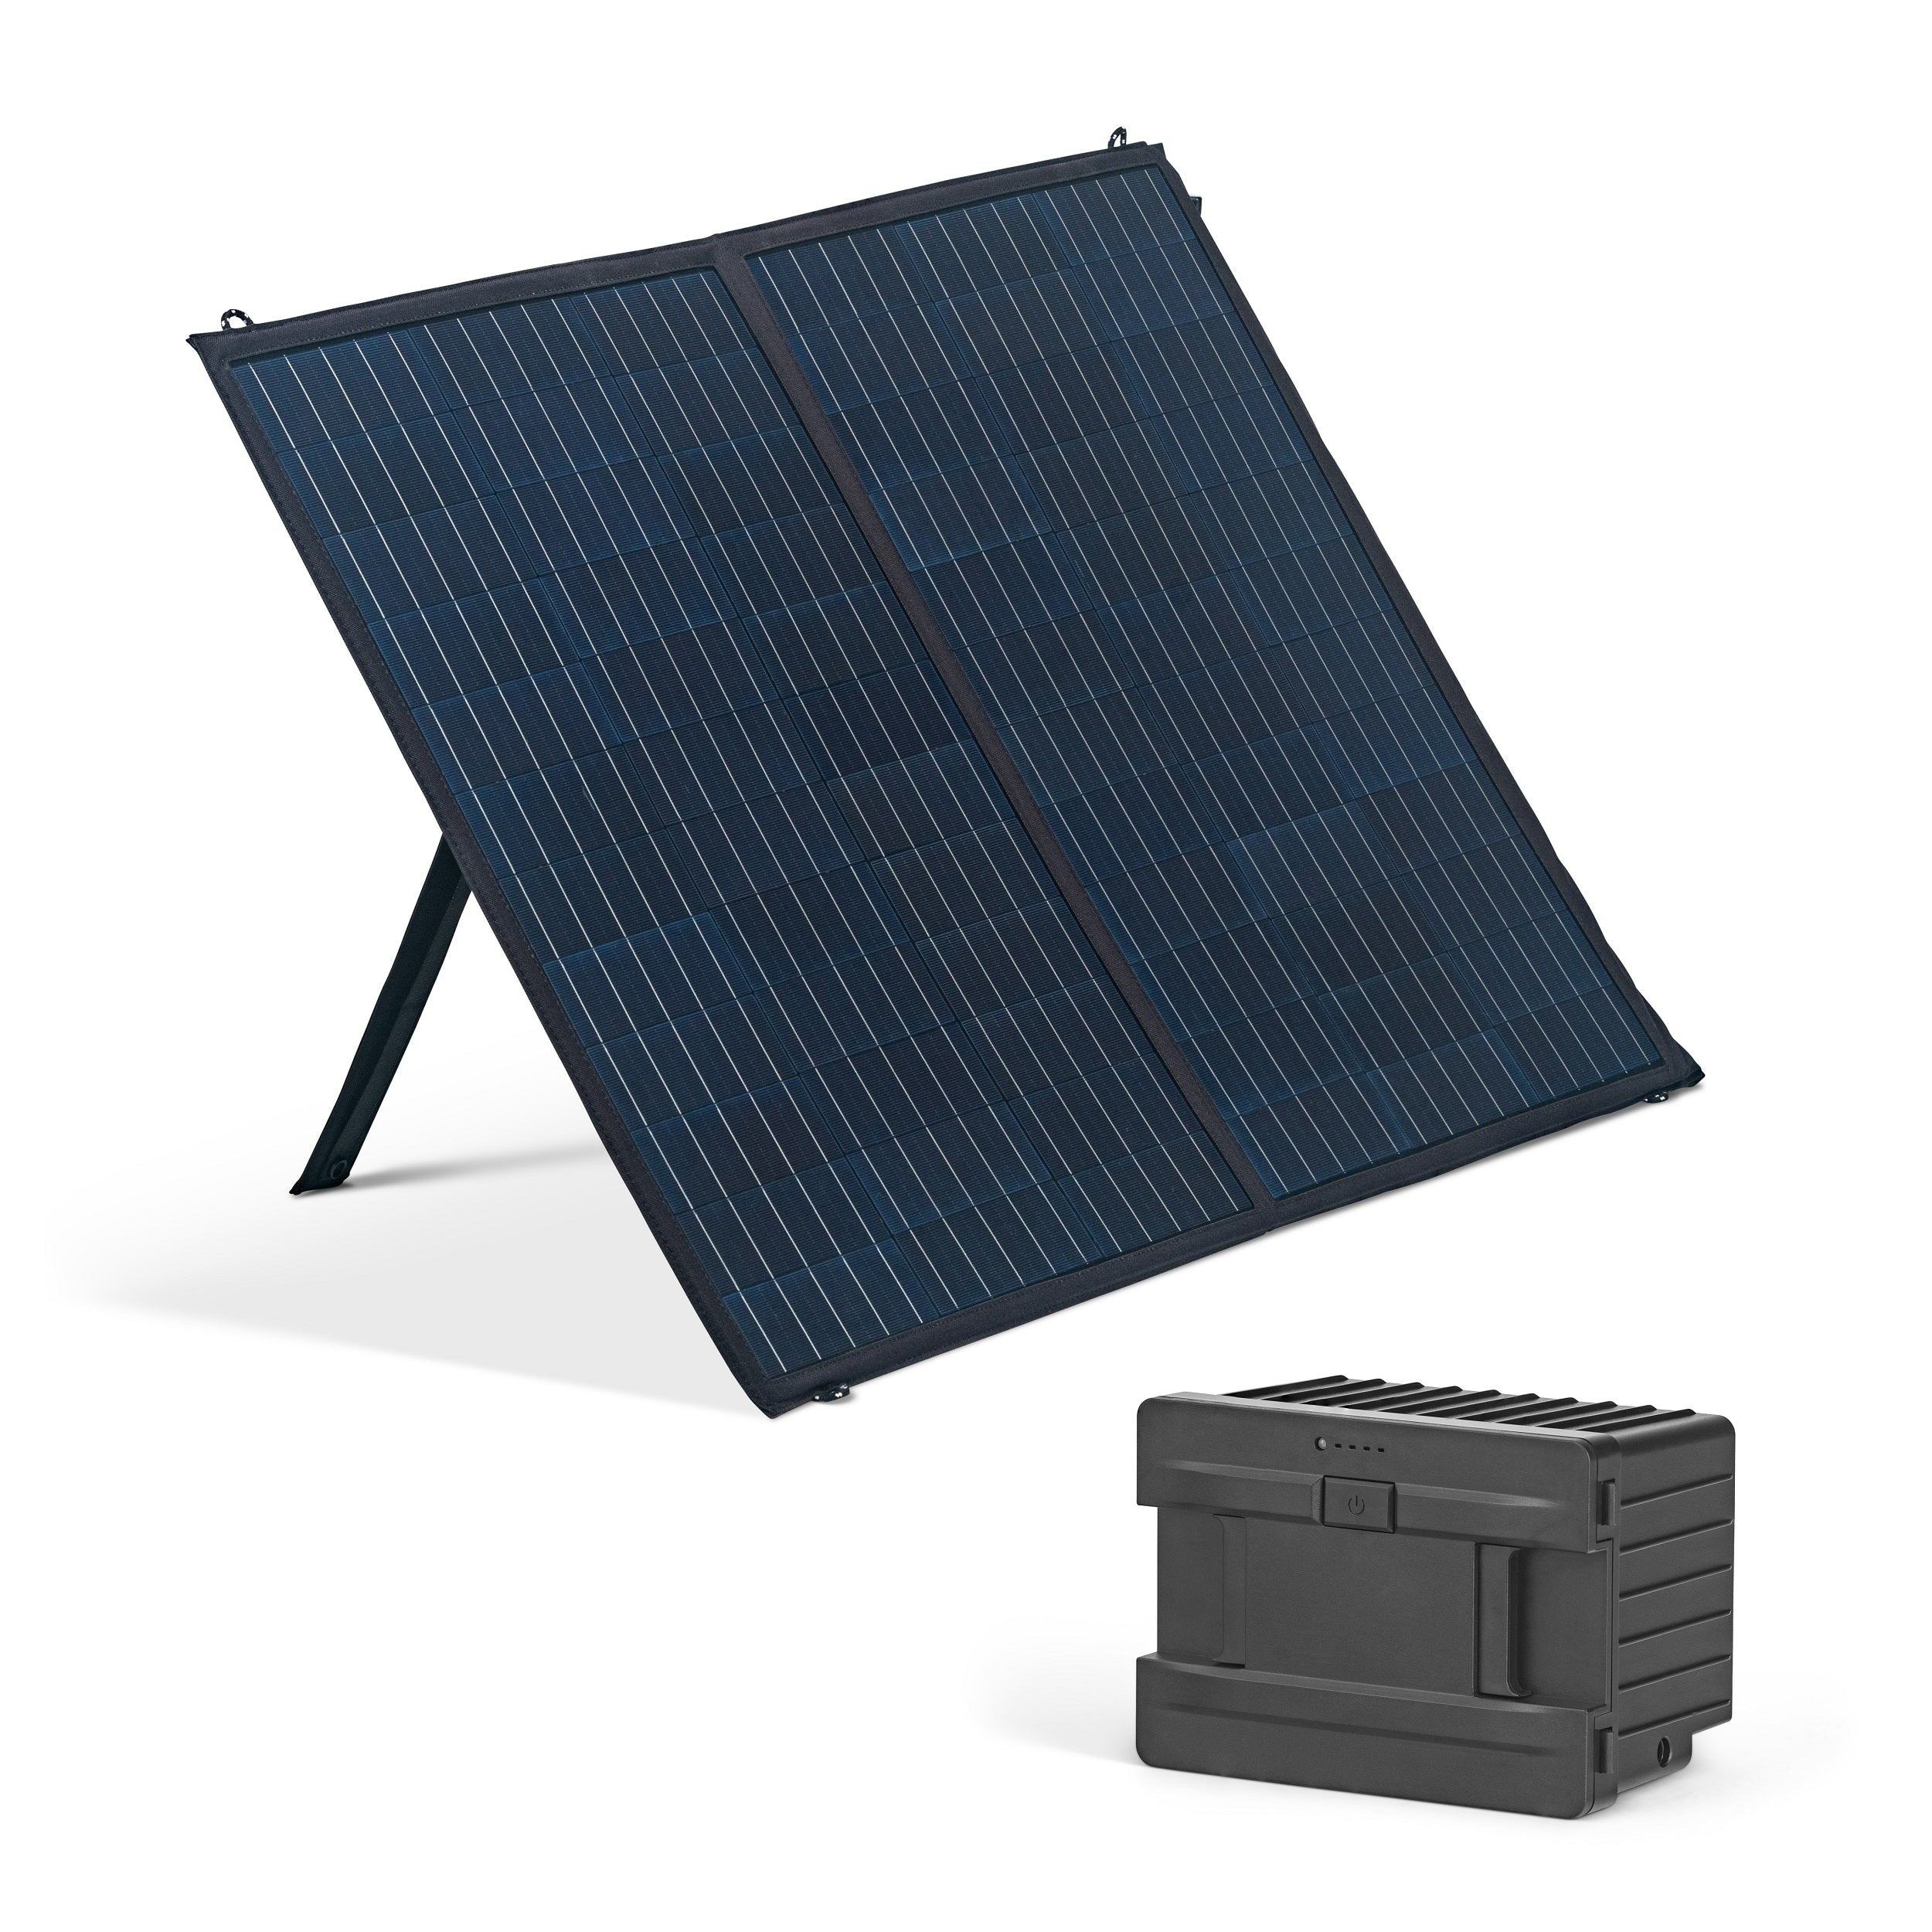 Newair Solar Generator Kit with 100W Solar Panel and 173W Removeable/R